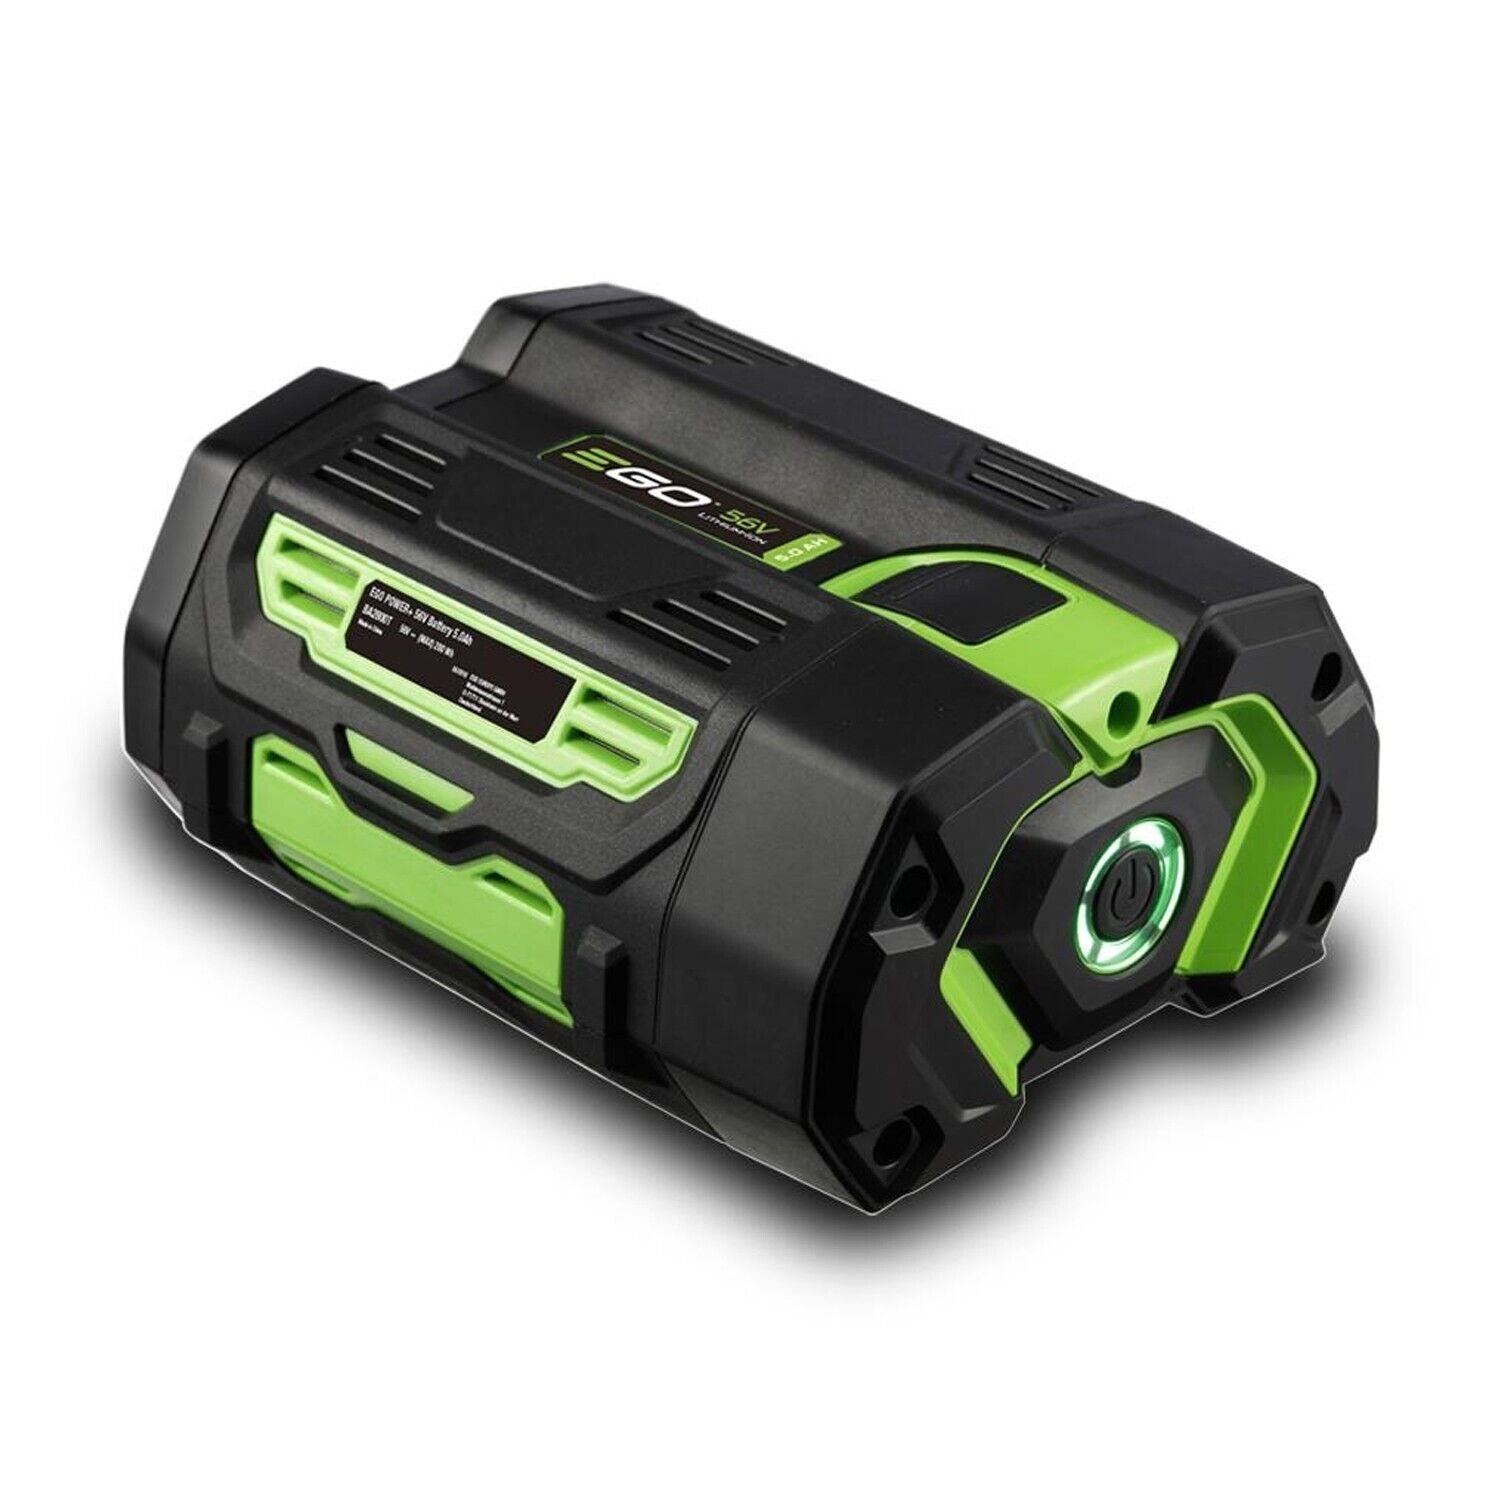 Compatible EGO Lithium-Ion Battery 56V 5.0Ah with Fuel Gauge - Compatible w/ All EGO Tools - Office Catch